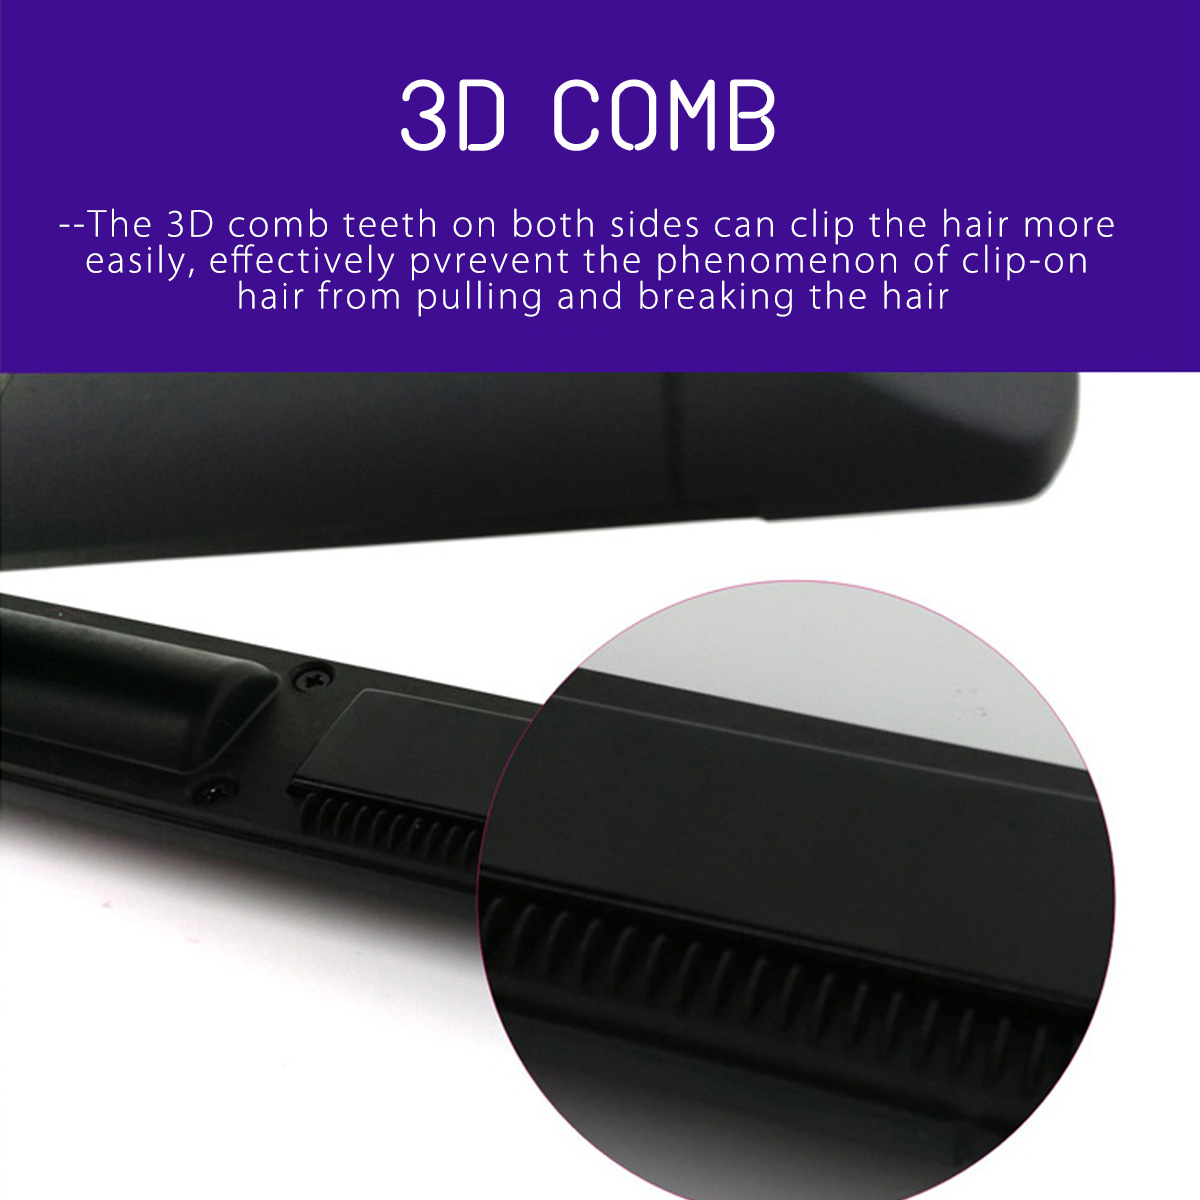 3-IN-1-Cordless-Hair-Straightener-Fast-Heating-Curler-USB-Rechargable-with-LED-Display-Power-Bank-Fu-1436268